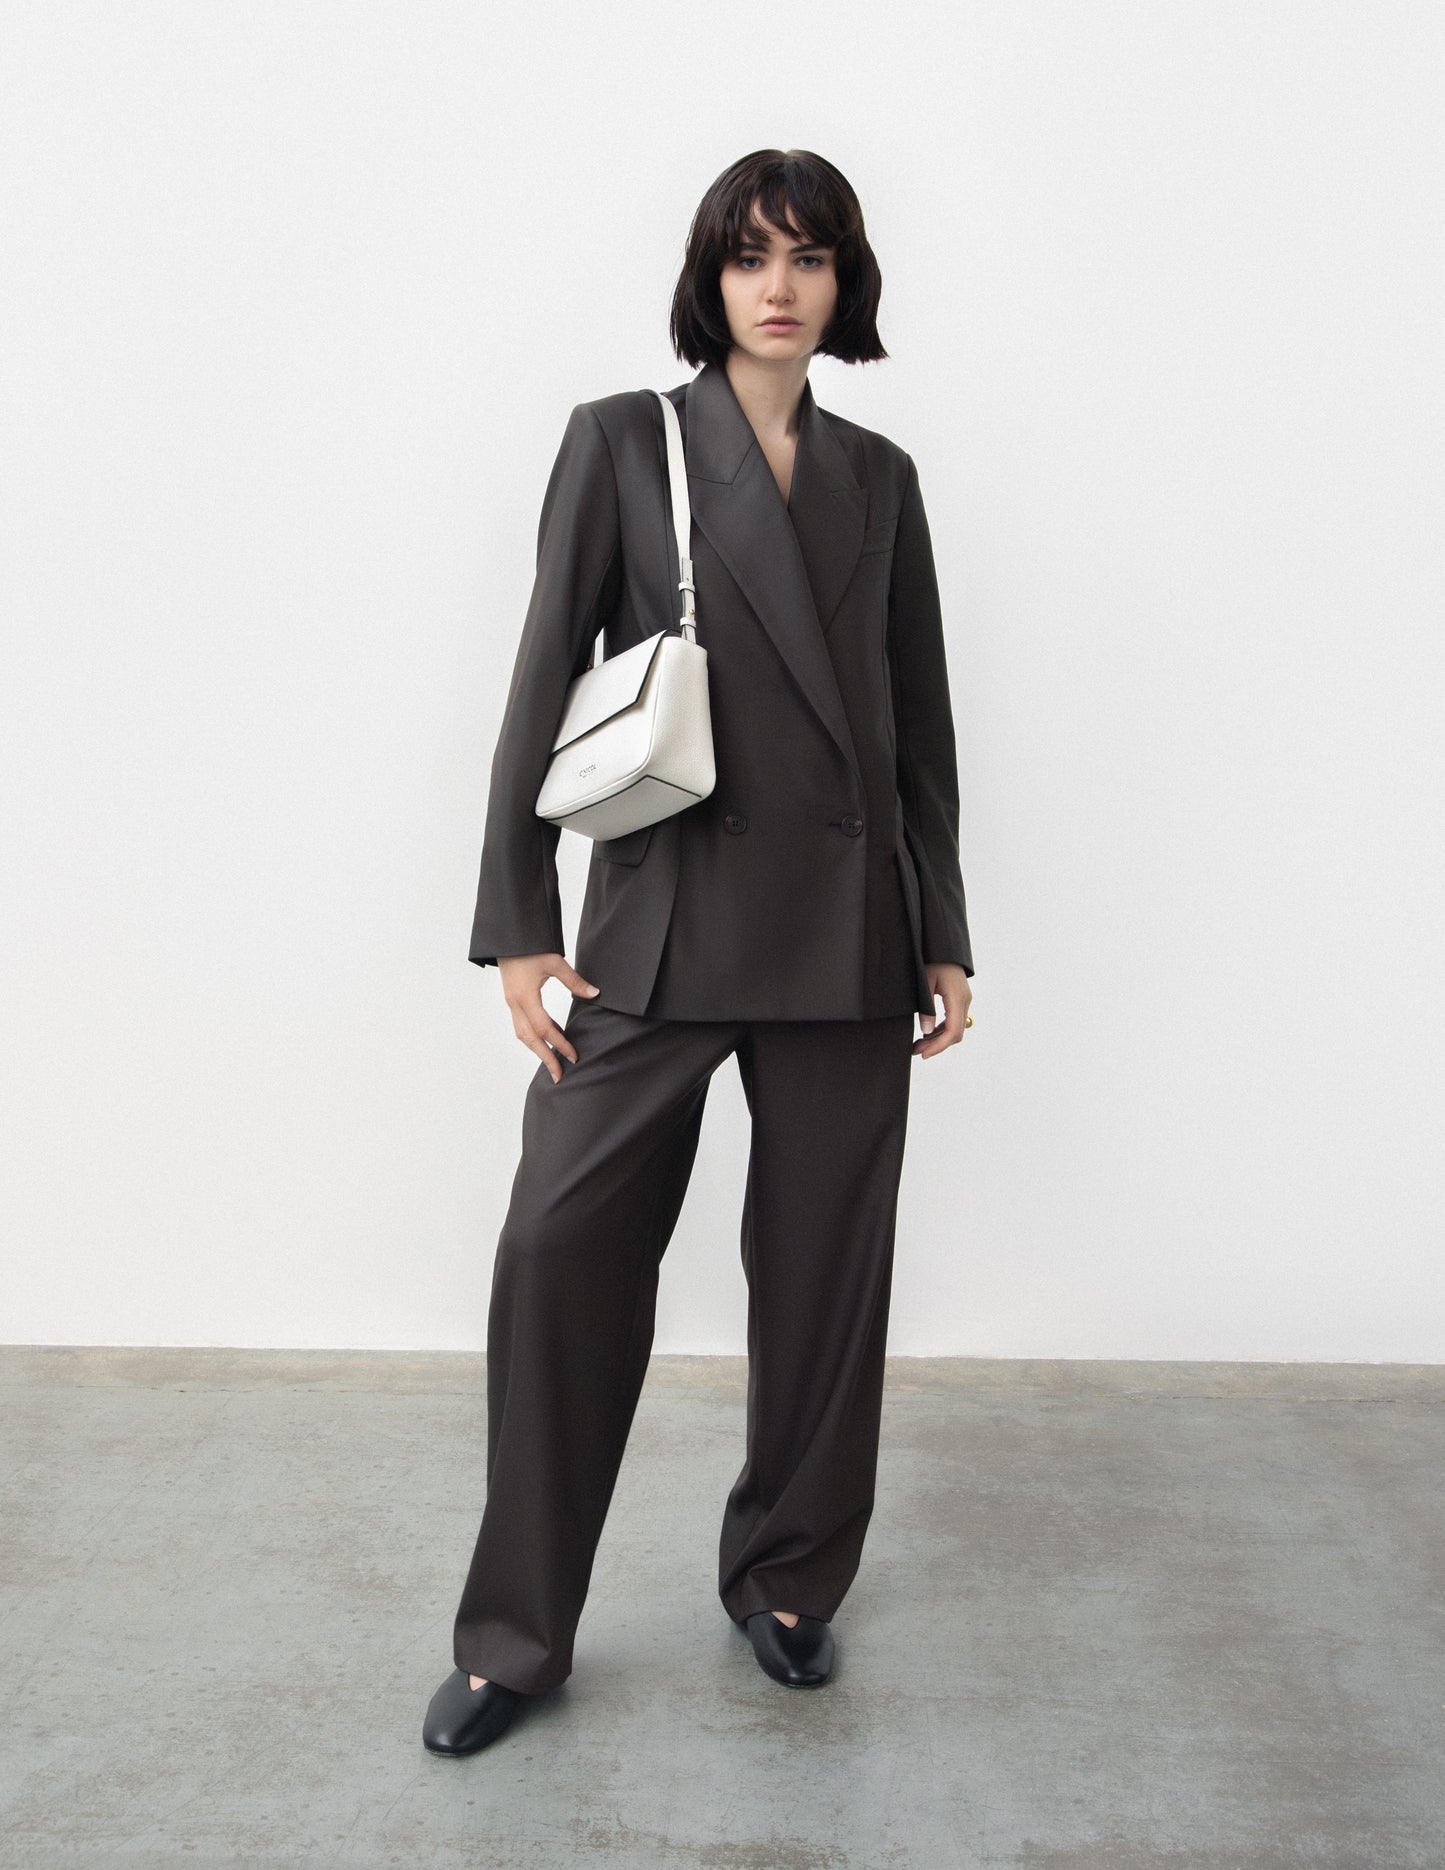 CNicol White Leather Fia Bag with Model in all black suit